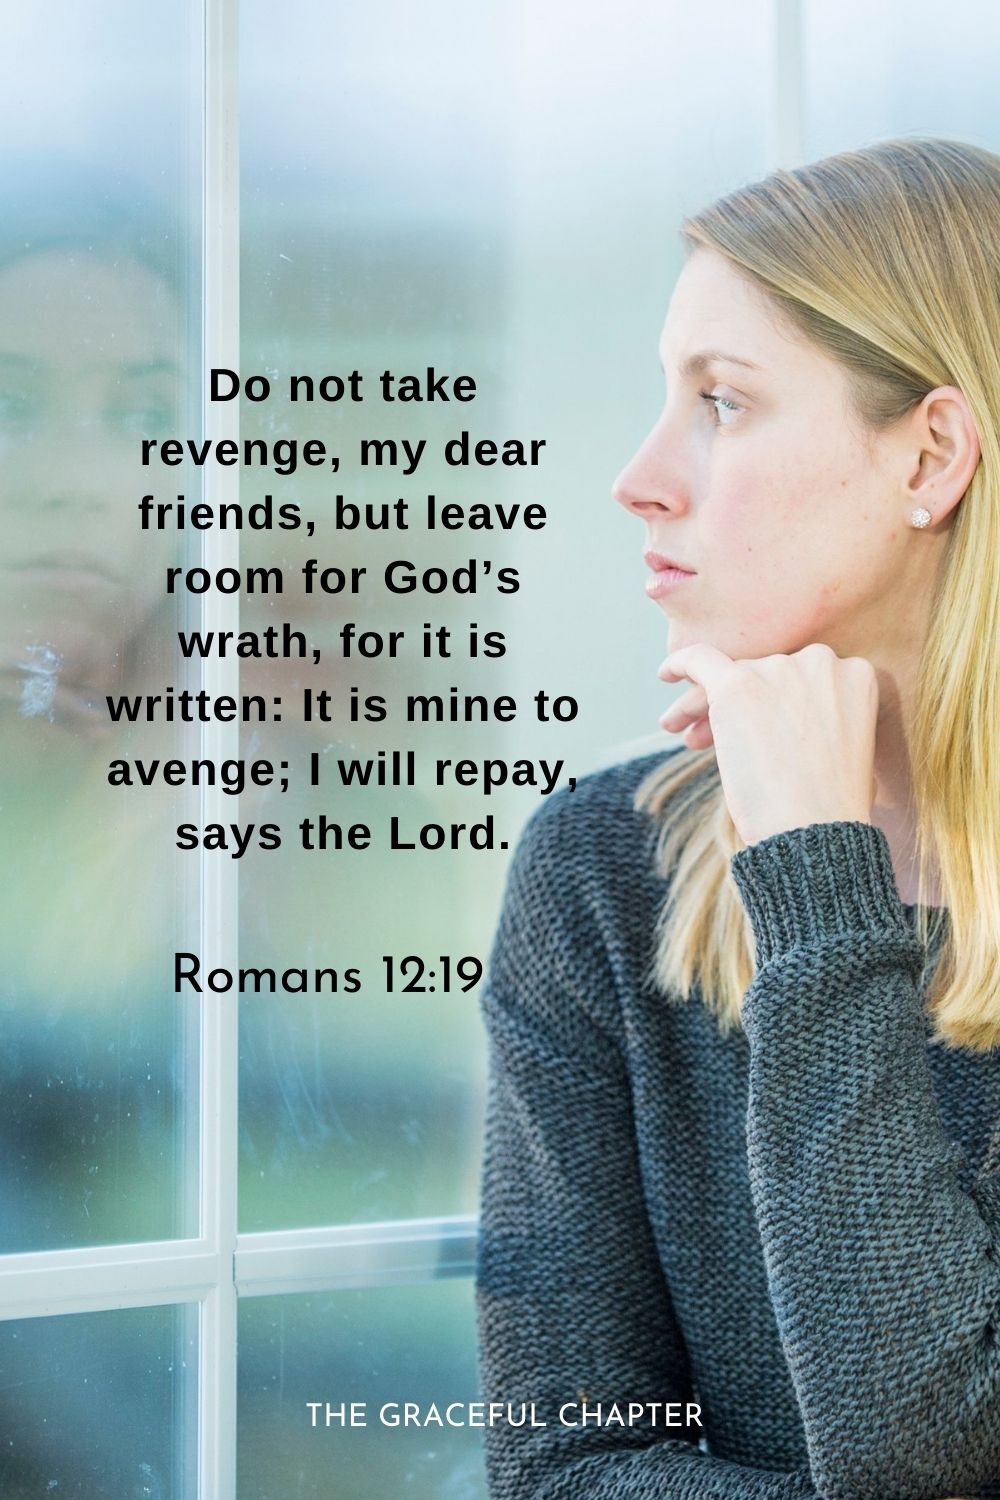 Do not take revenge, my dear friends, but leave room for God’s wrath, for it is written: It is mine to avenge; I will repay, says the Lord.